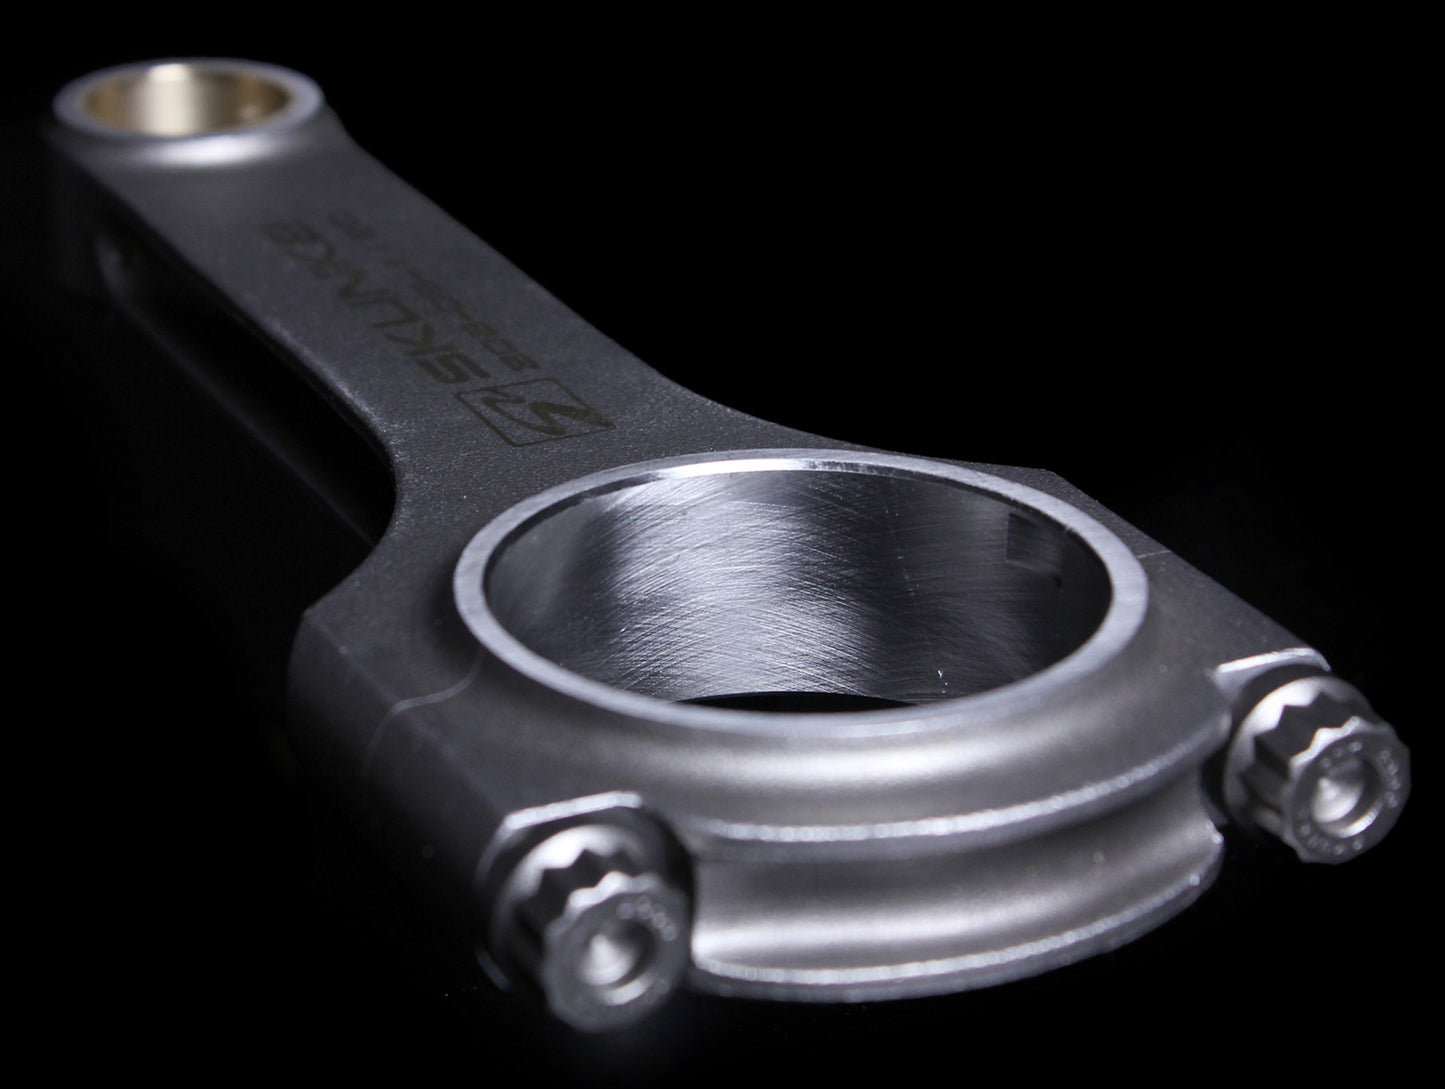 Skunk2 Alpha Connecting Rods